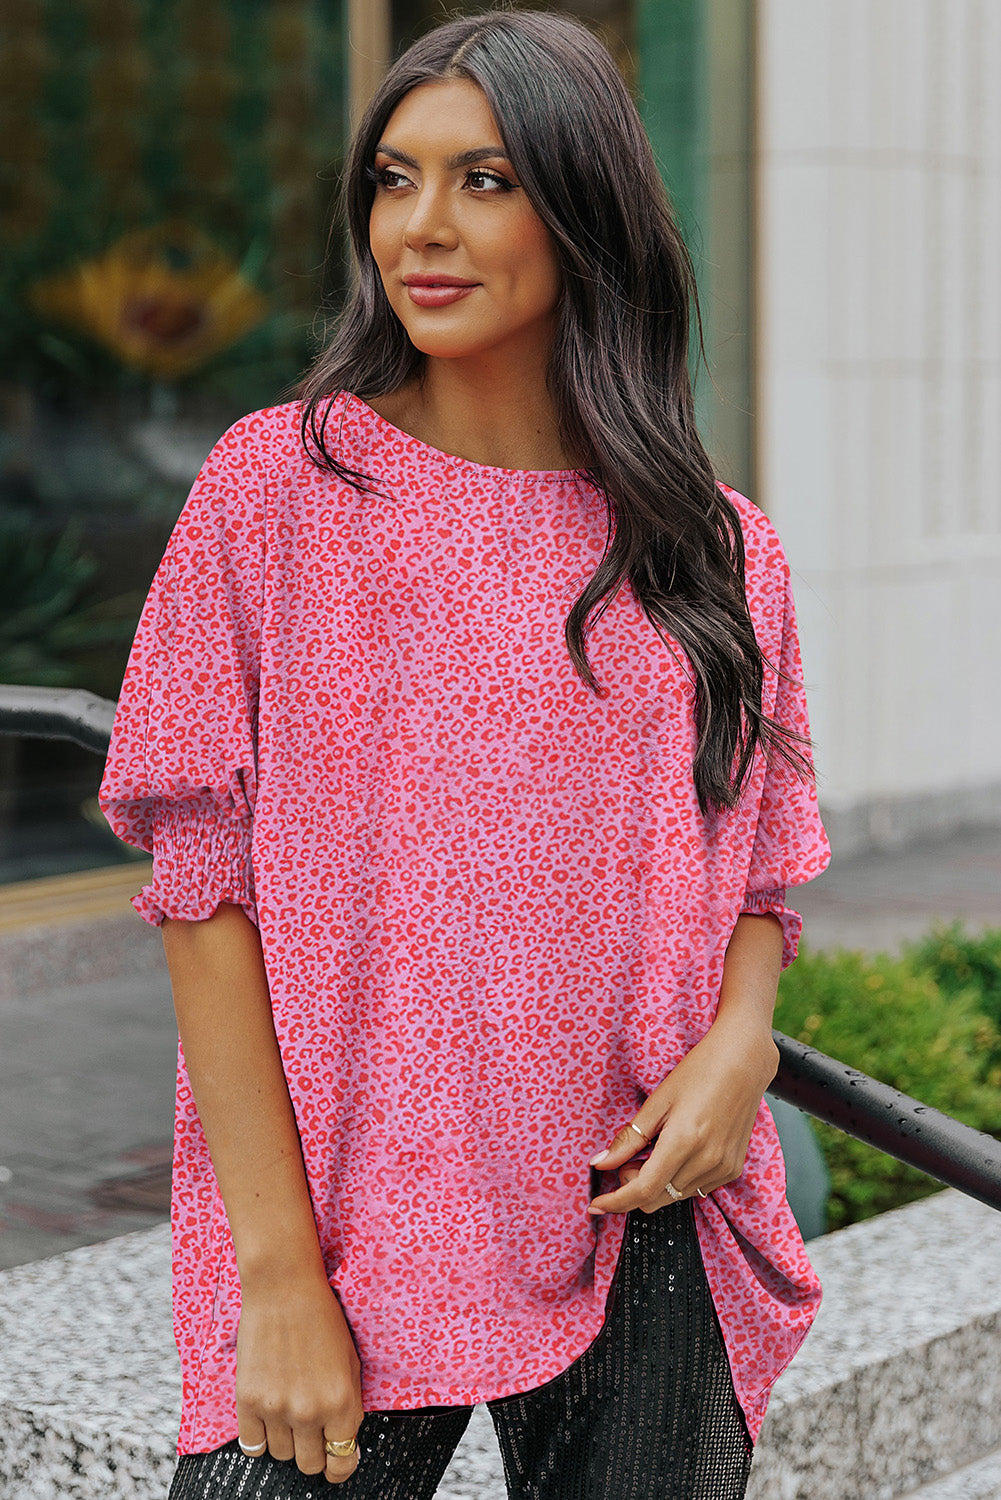 Pink Leopard Oversized Top